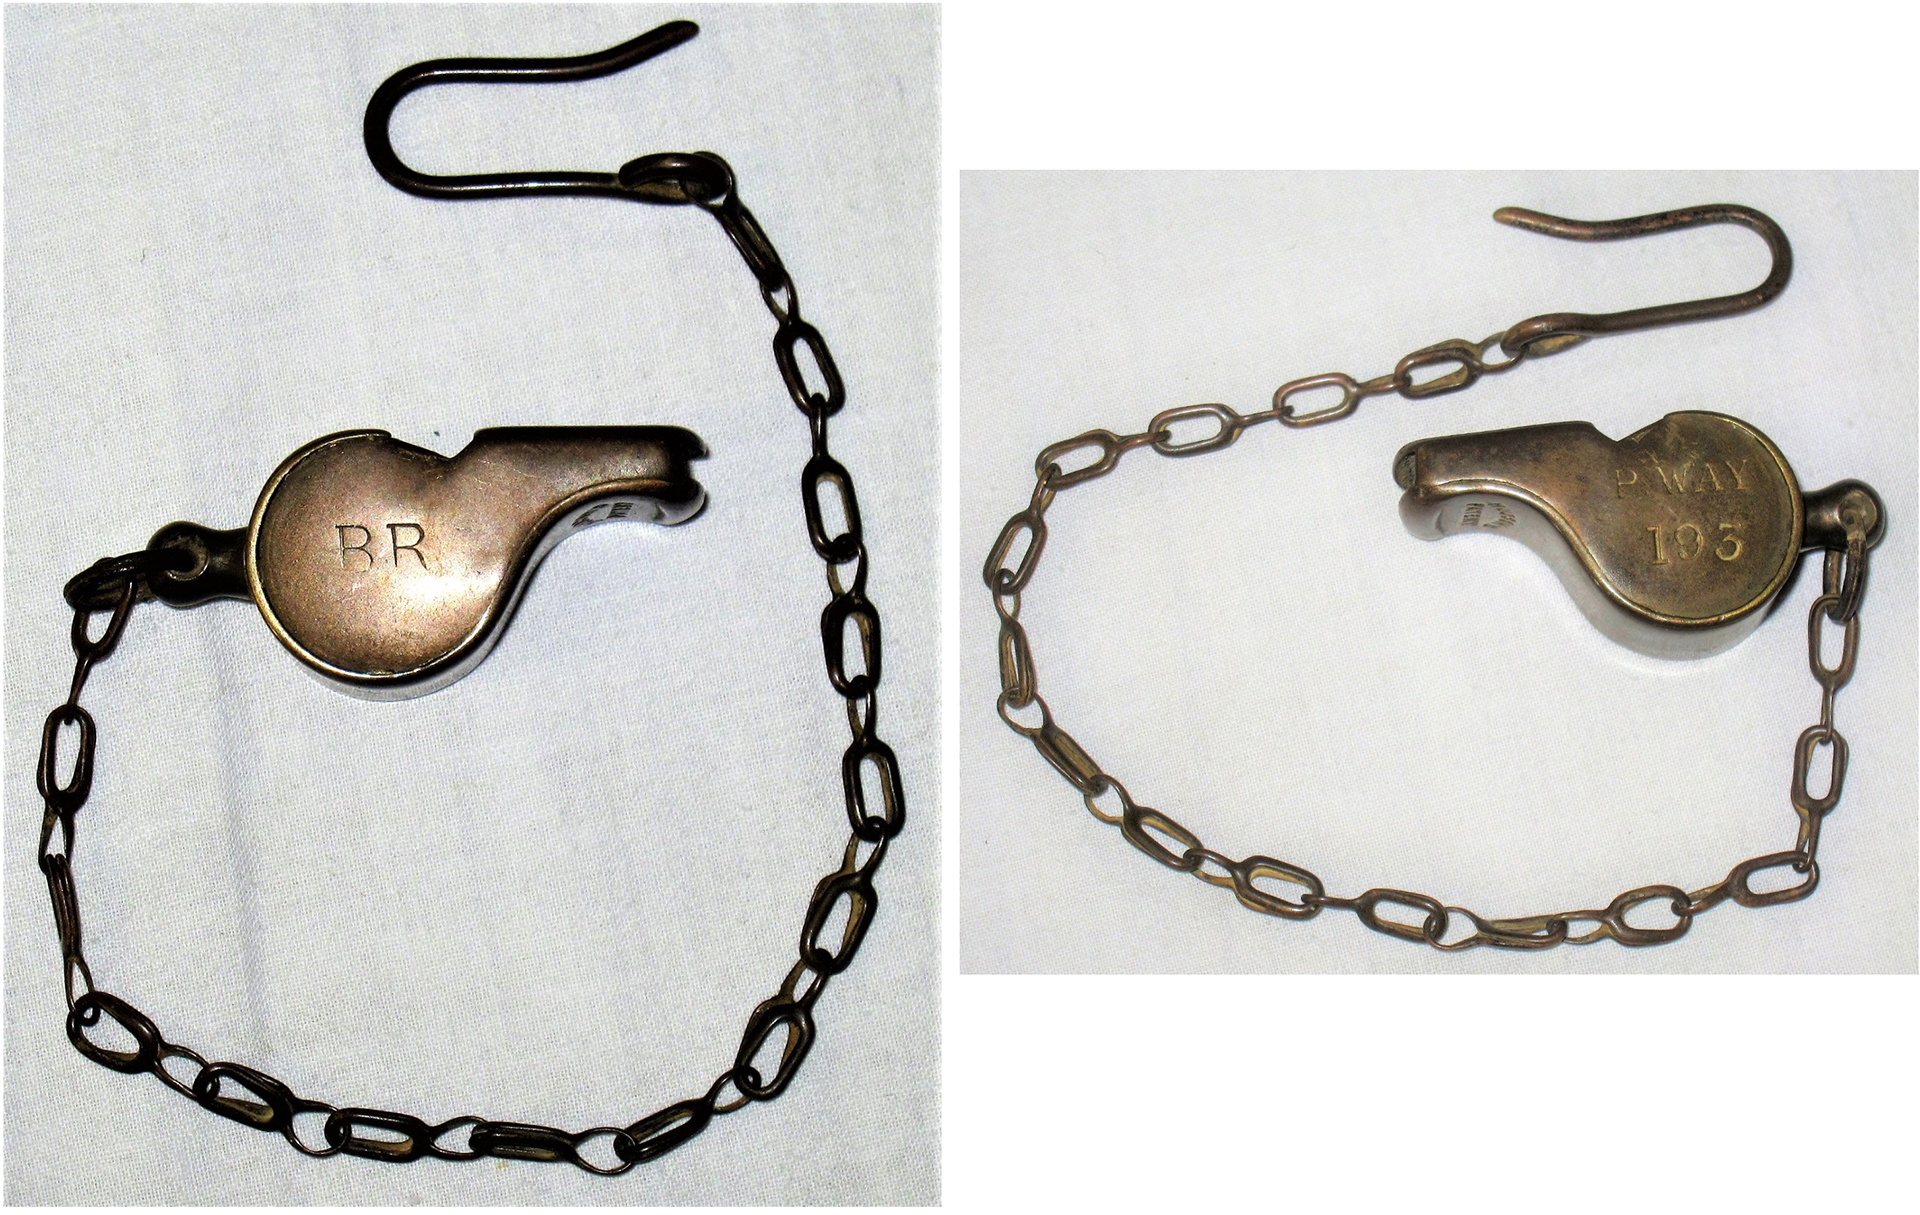 Barry Railway Guards Whistle stamped on side BR P way 193. Complete with chain and button hook.